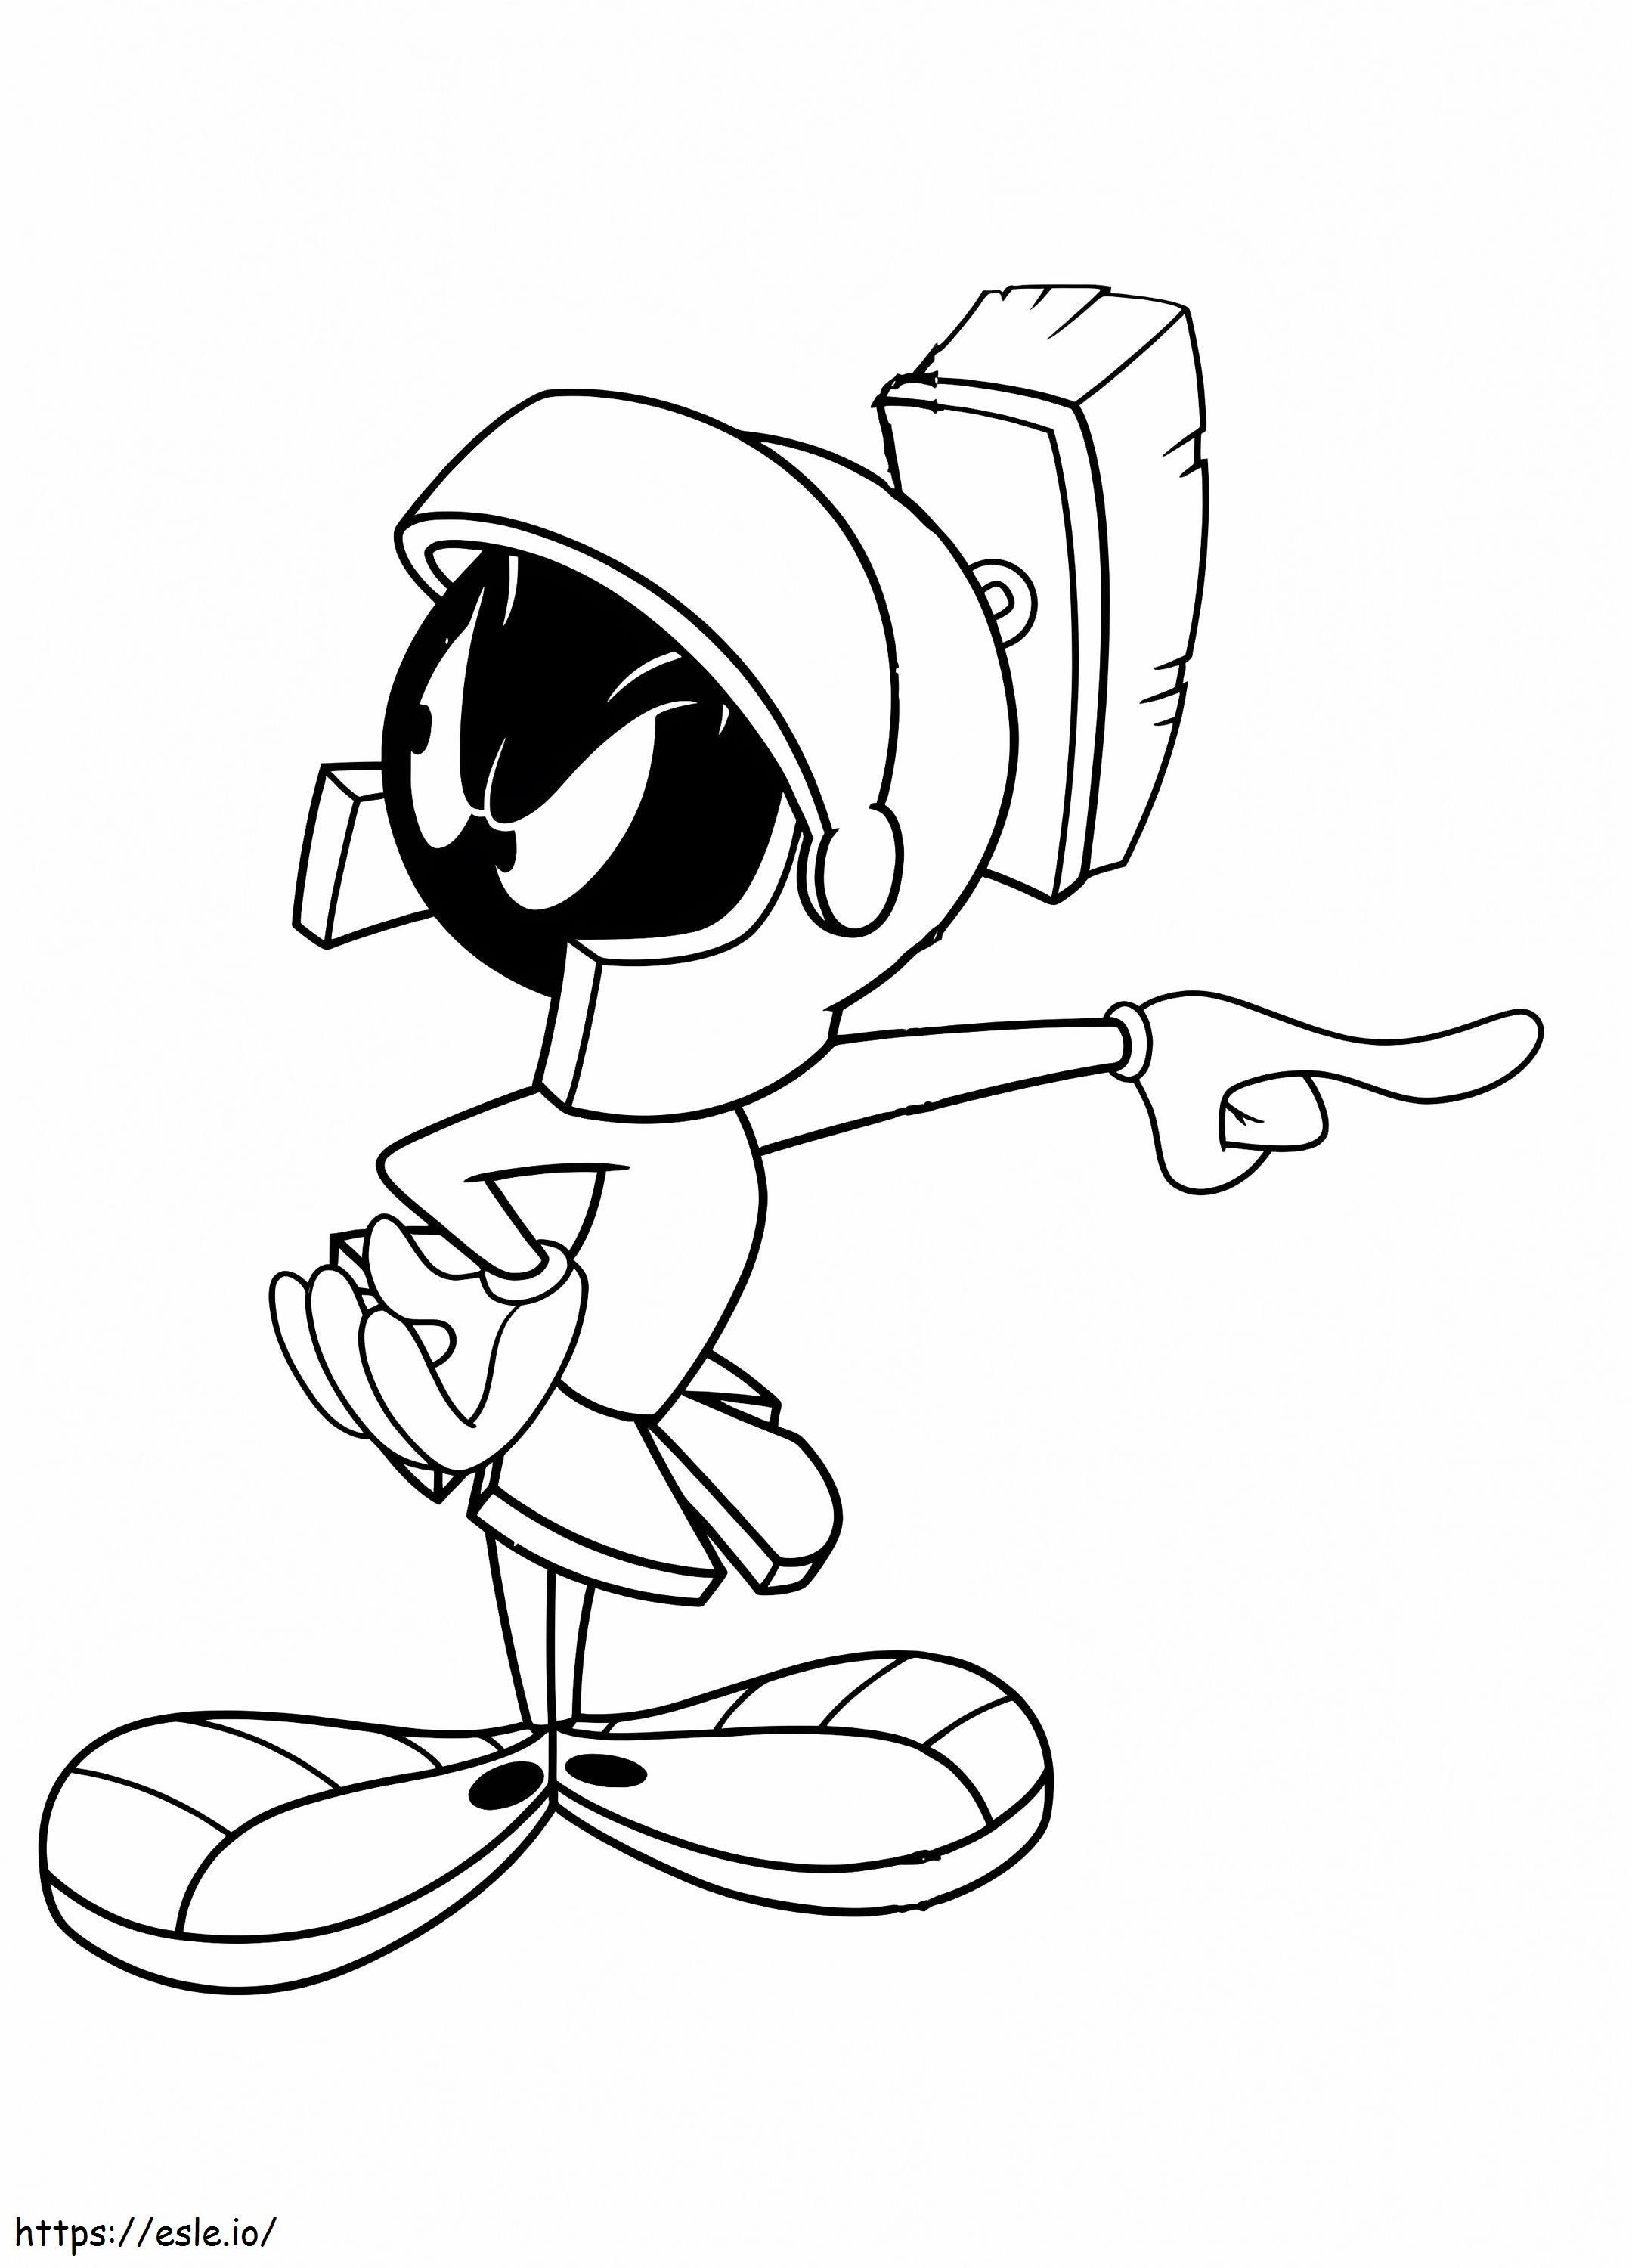 Marvin The Martian From Looney Tunes coloring page